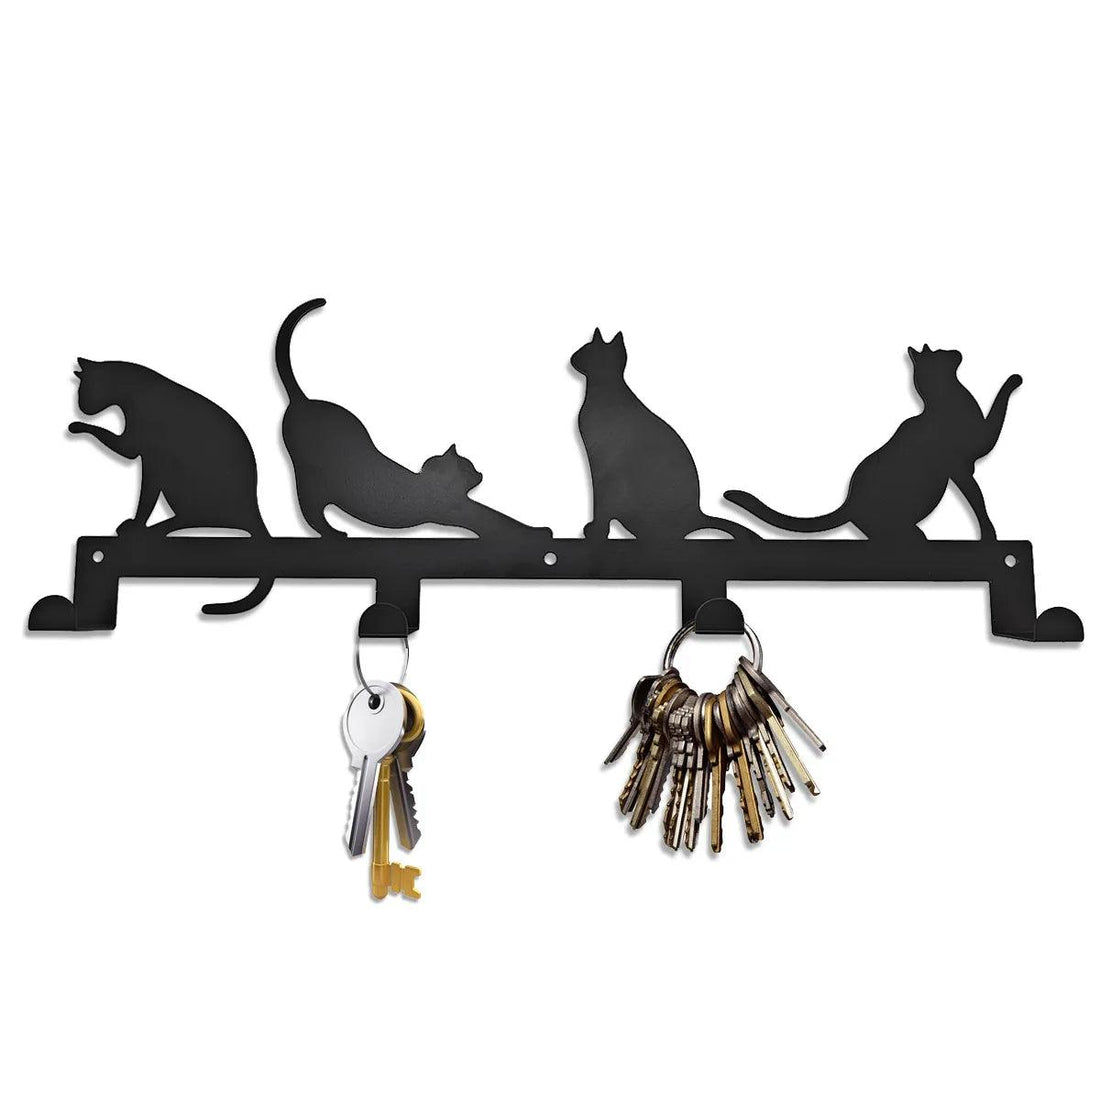 Decorative Cat Wall Hanger Rack - Just Cats - Gifts for Cat Lovers